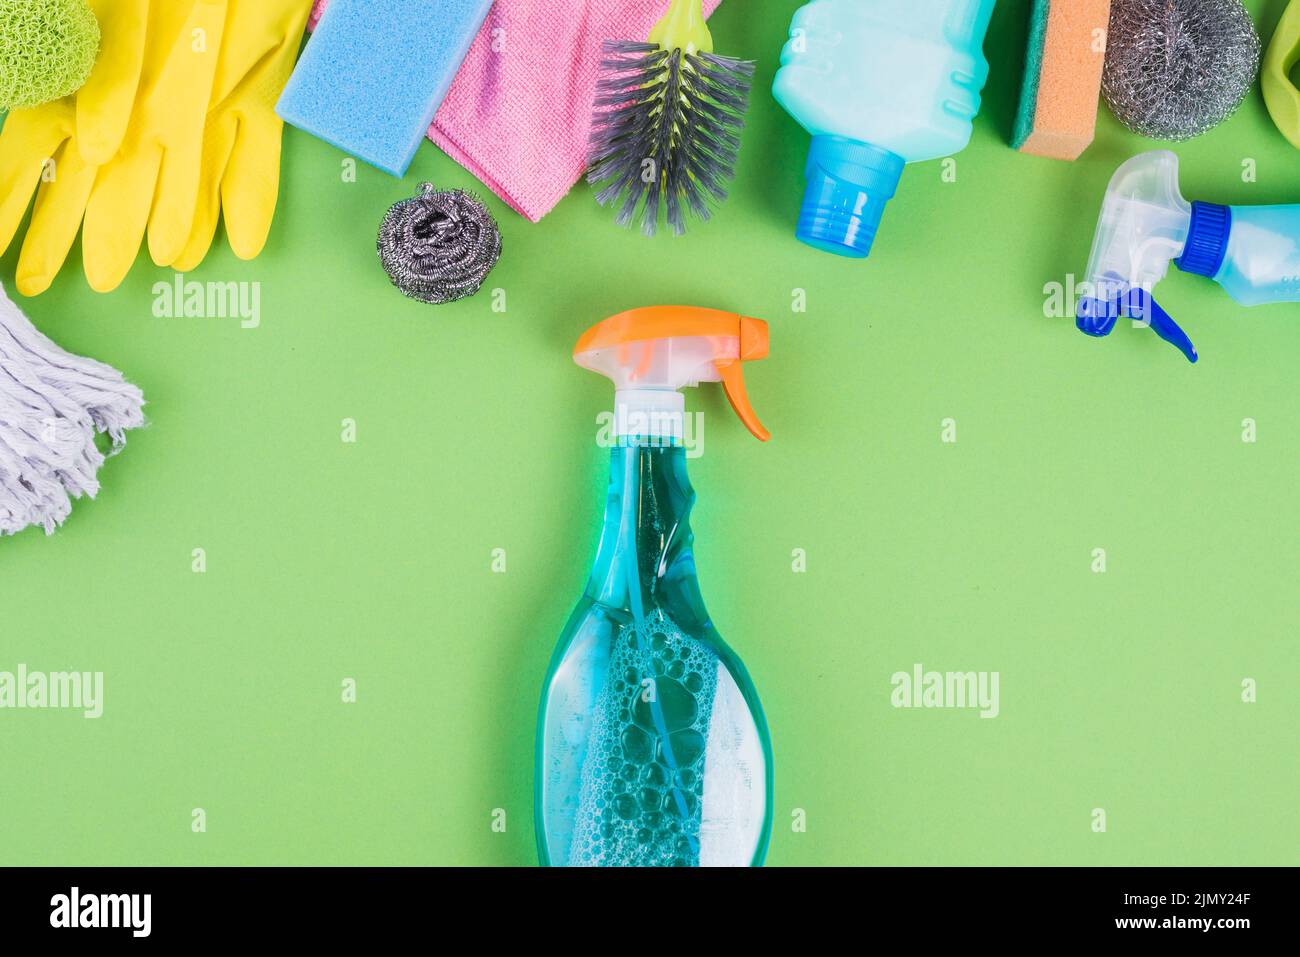 Spray bottles with blue liquid near various cleaning equipments Stock Photo